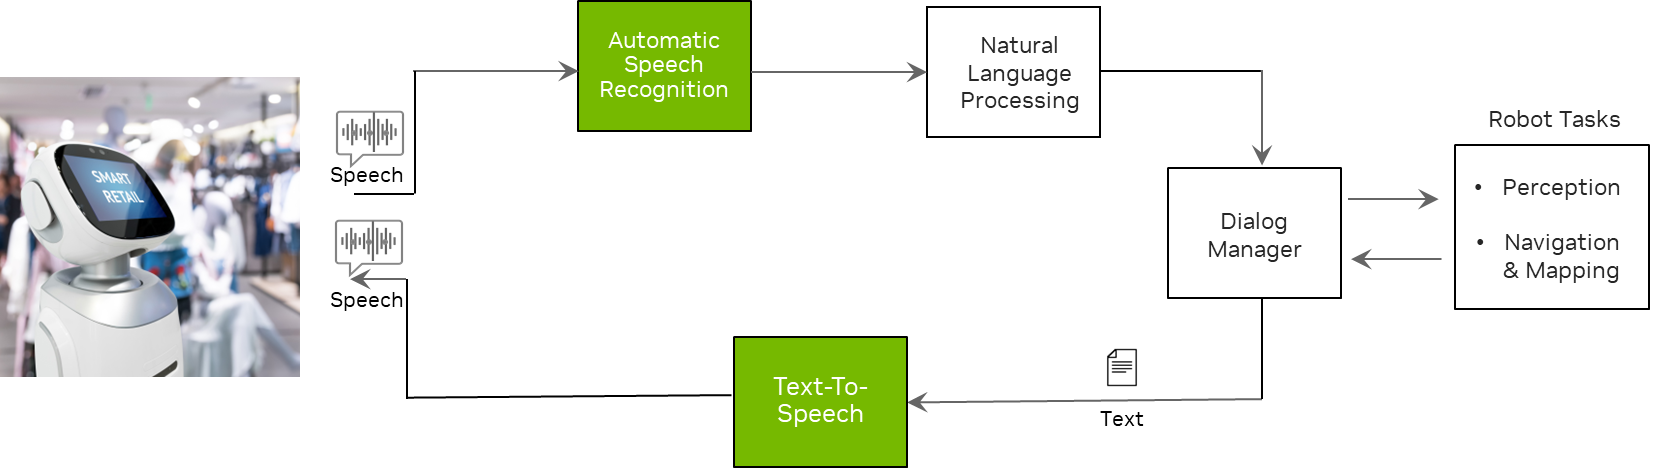 Workflow architecture diagram showing how speech inputs map to robot tasks through a dialog manager and back out as text converted to speech.